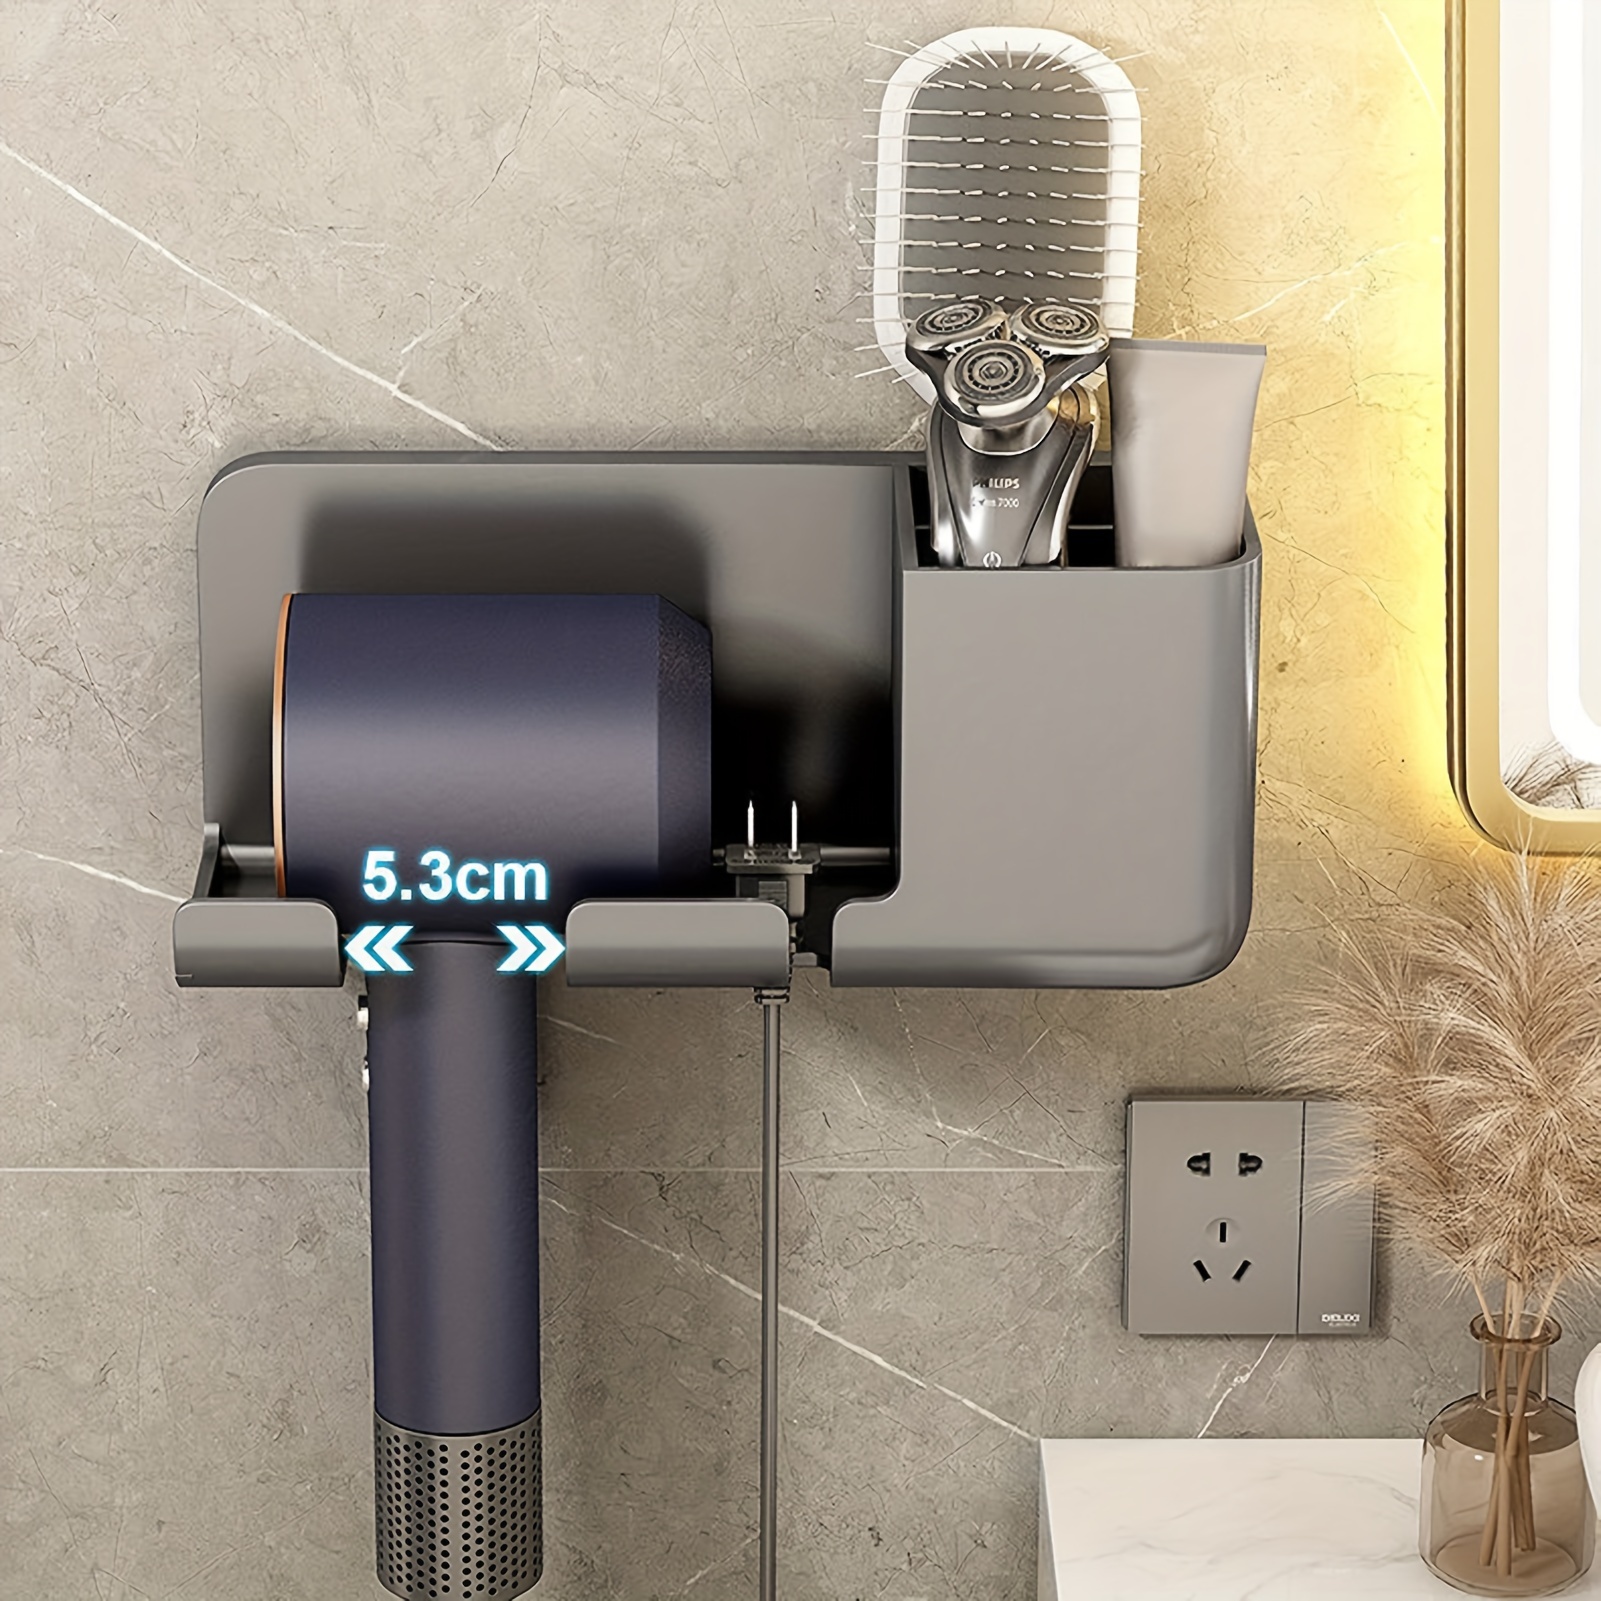 

Hair Dryer Holder Wall Mount Free Punch Hair Appliance Holder With Shelf For Bathroom Accessories